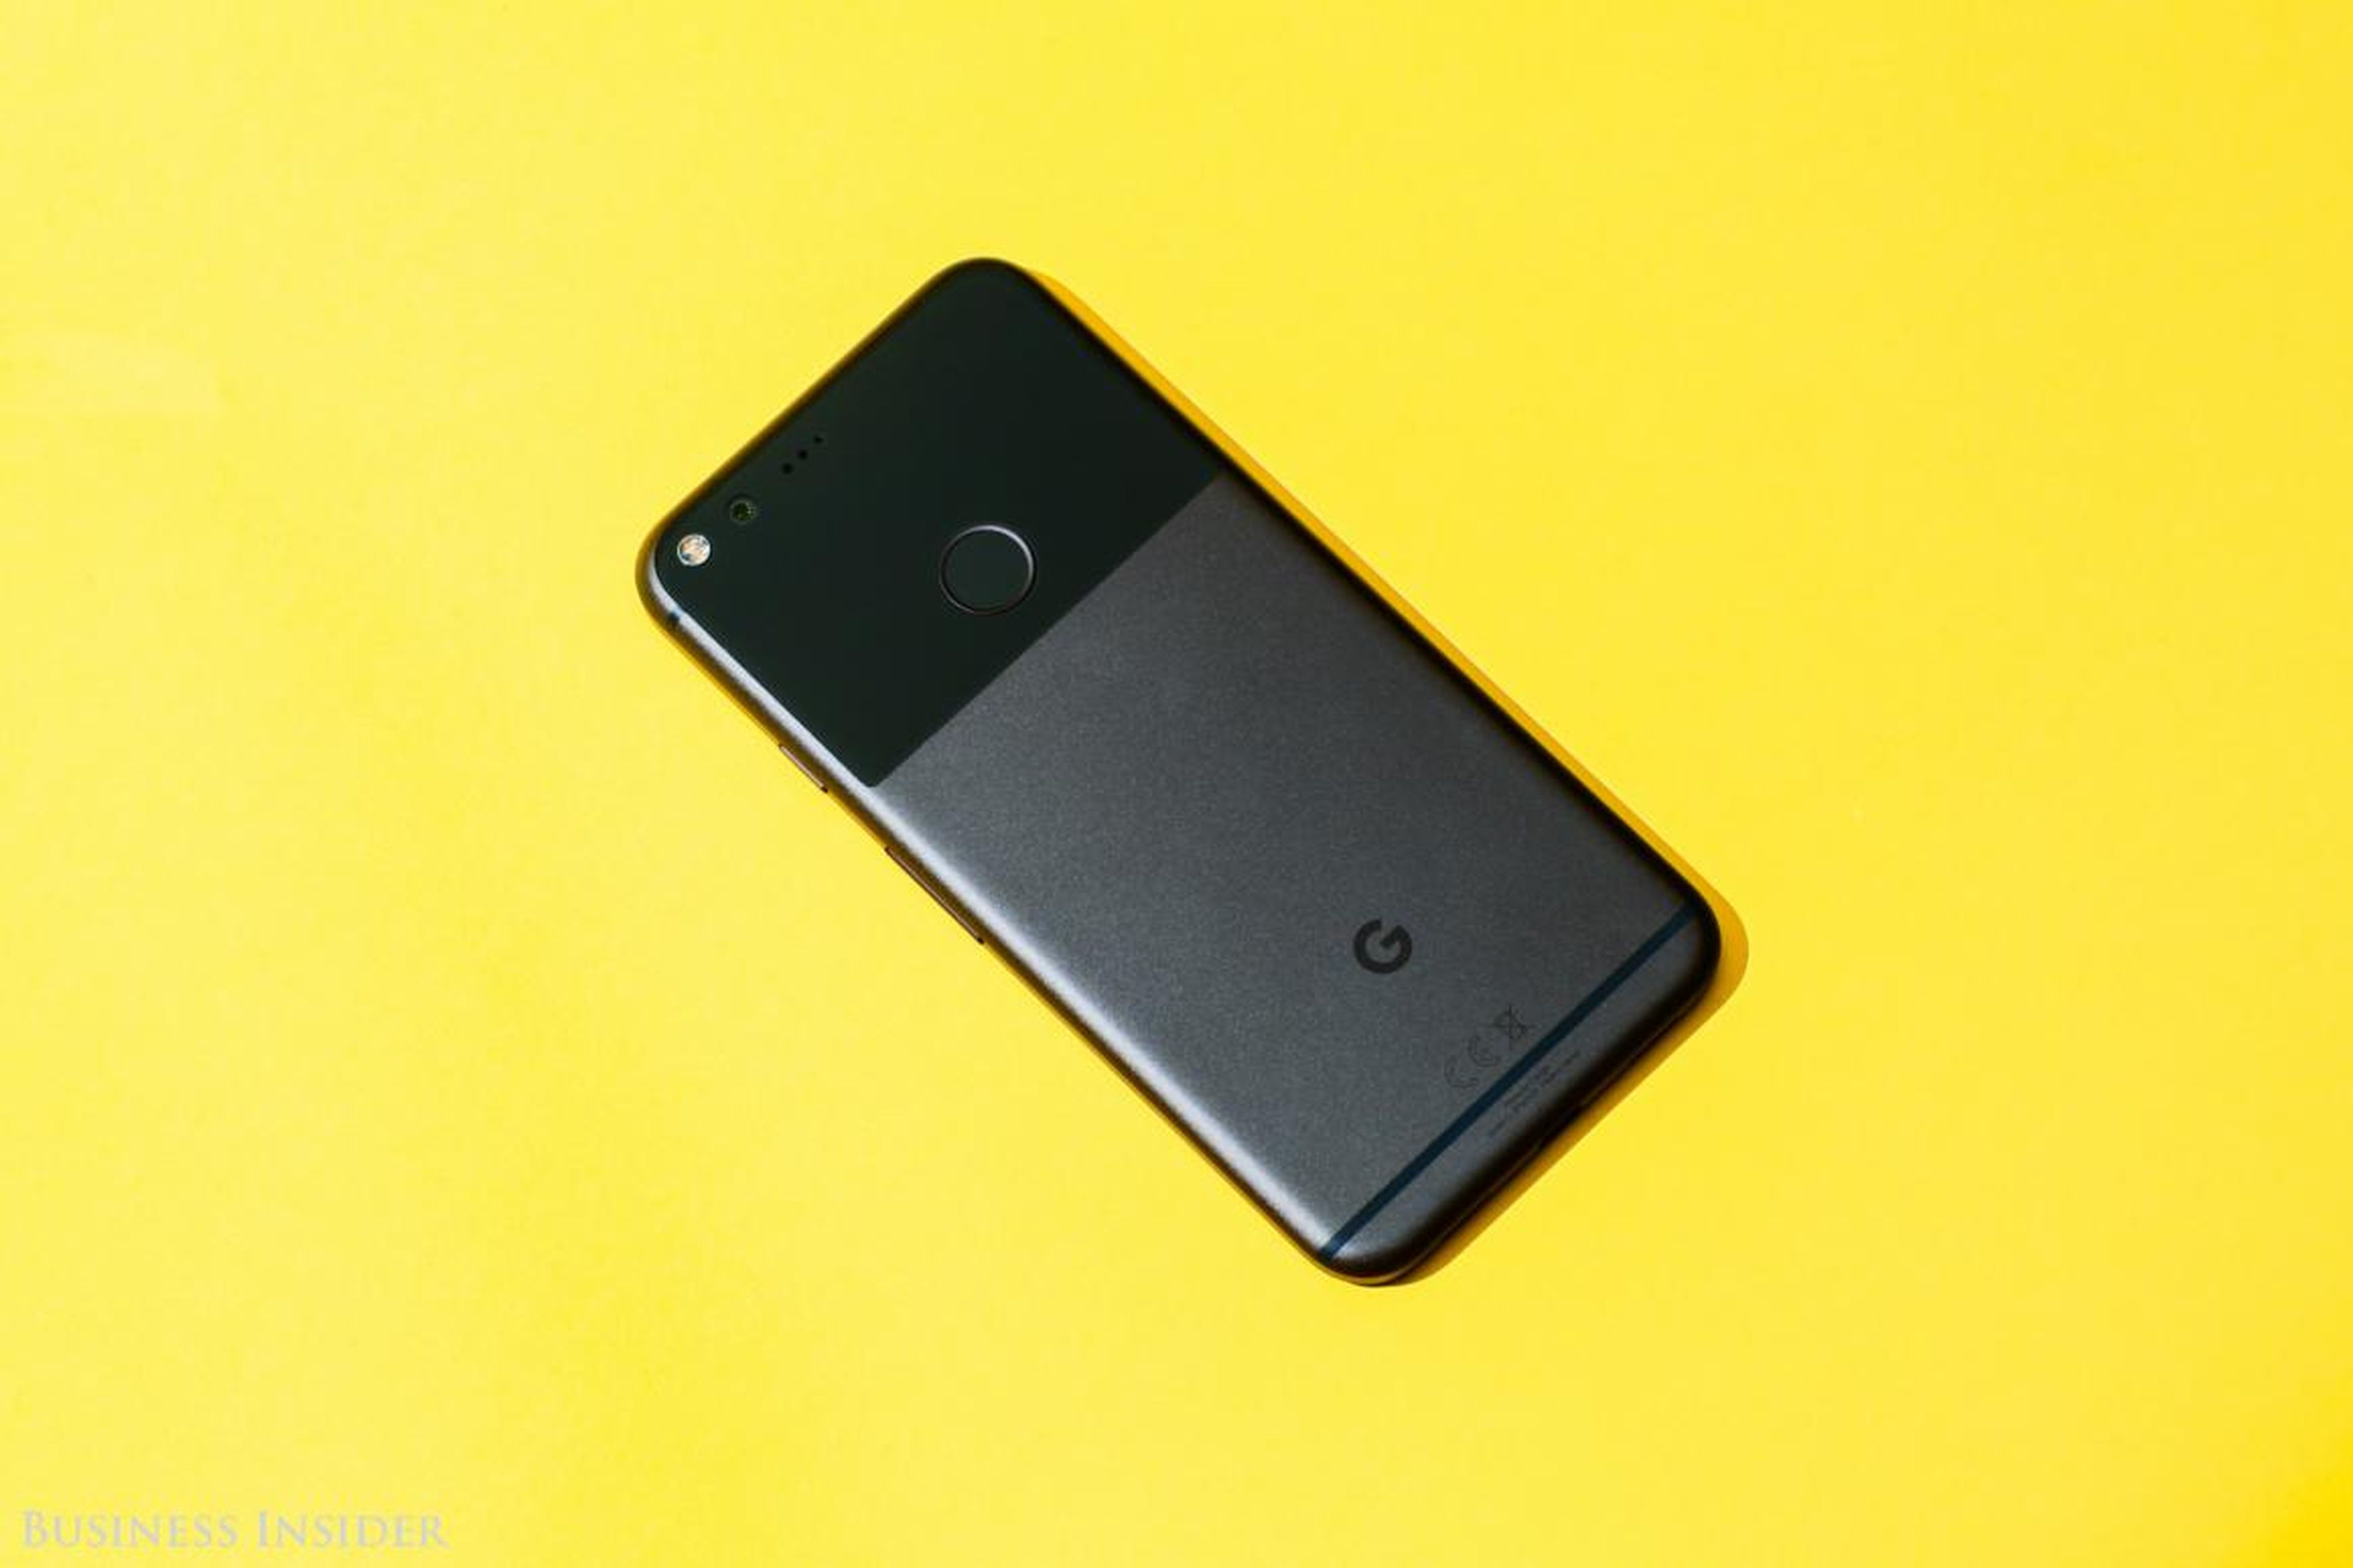 Smartphone cameras have become extremely important as apps like Instagram and Snapchat have risen in prominence. But Apple lost the mobile photography crown in 2016, when Google raised the bar with its Pixel camera.